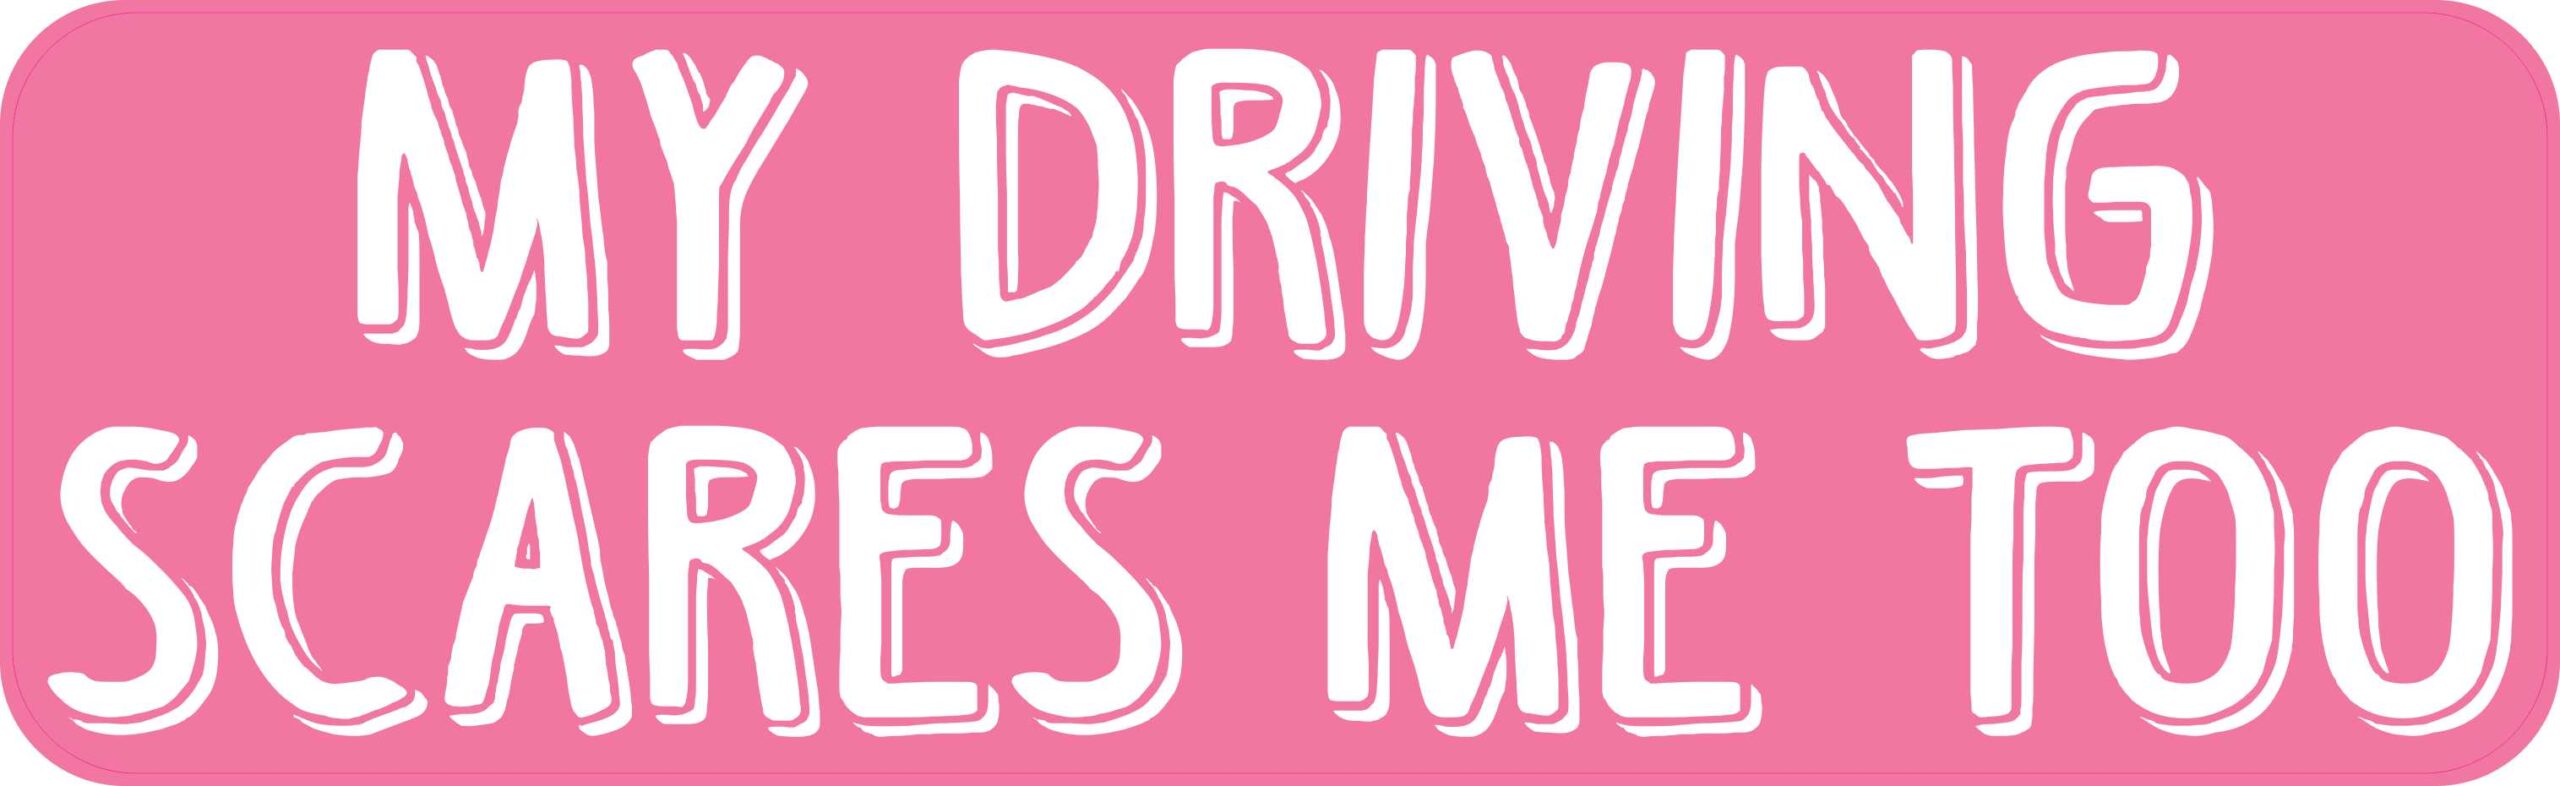 Stickertalk Pink My Driving Scares Me Too Magnet 10 Inches X 3 Inches 